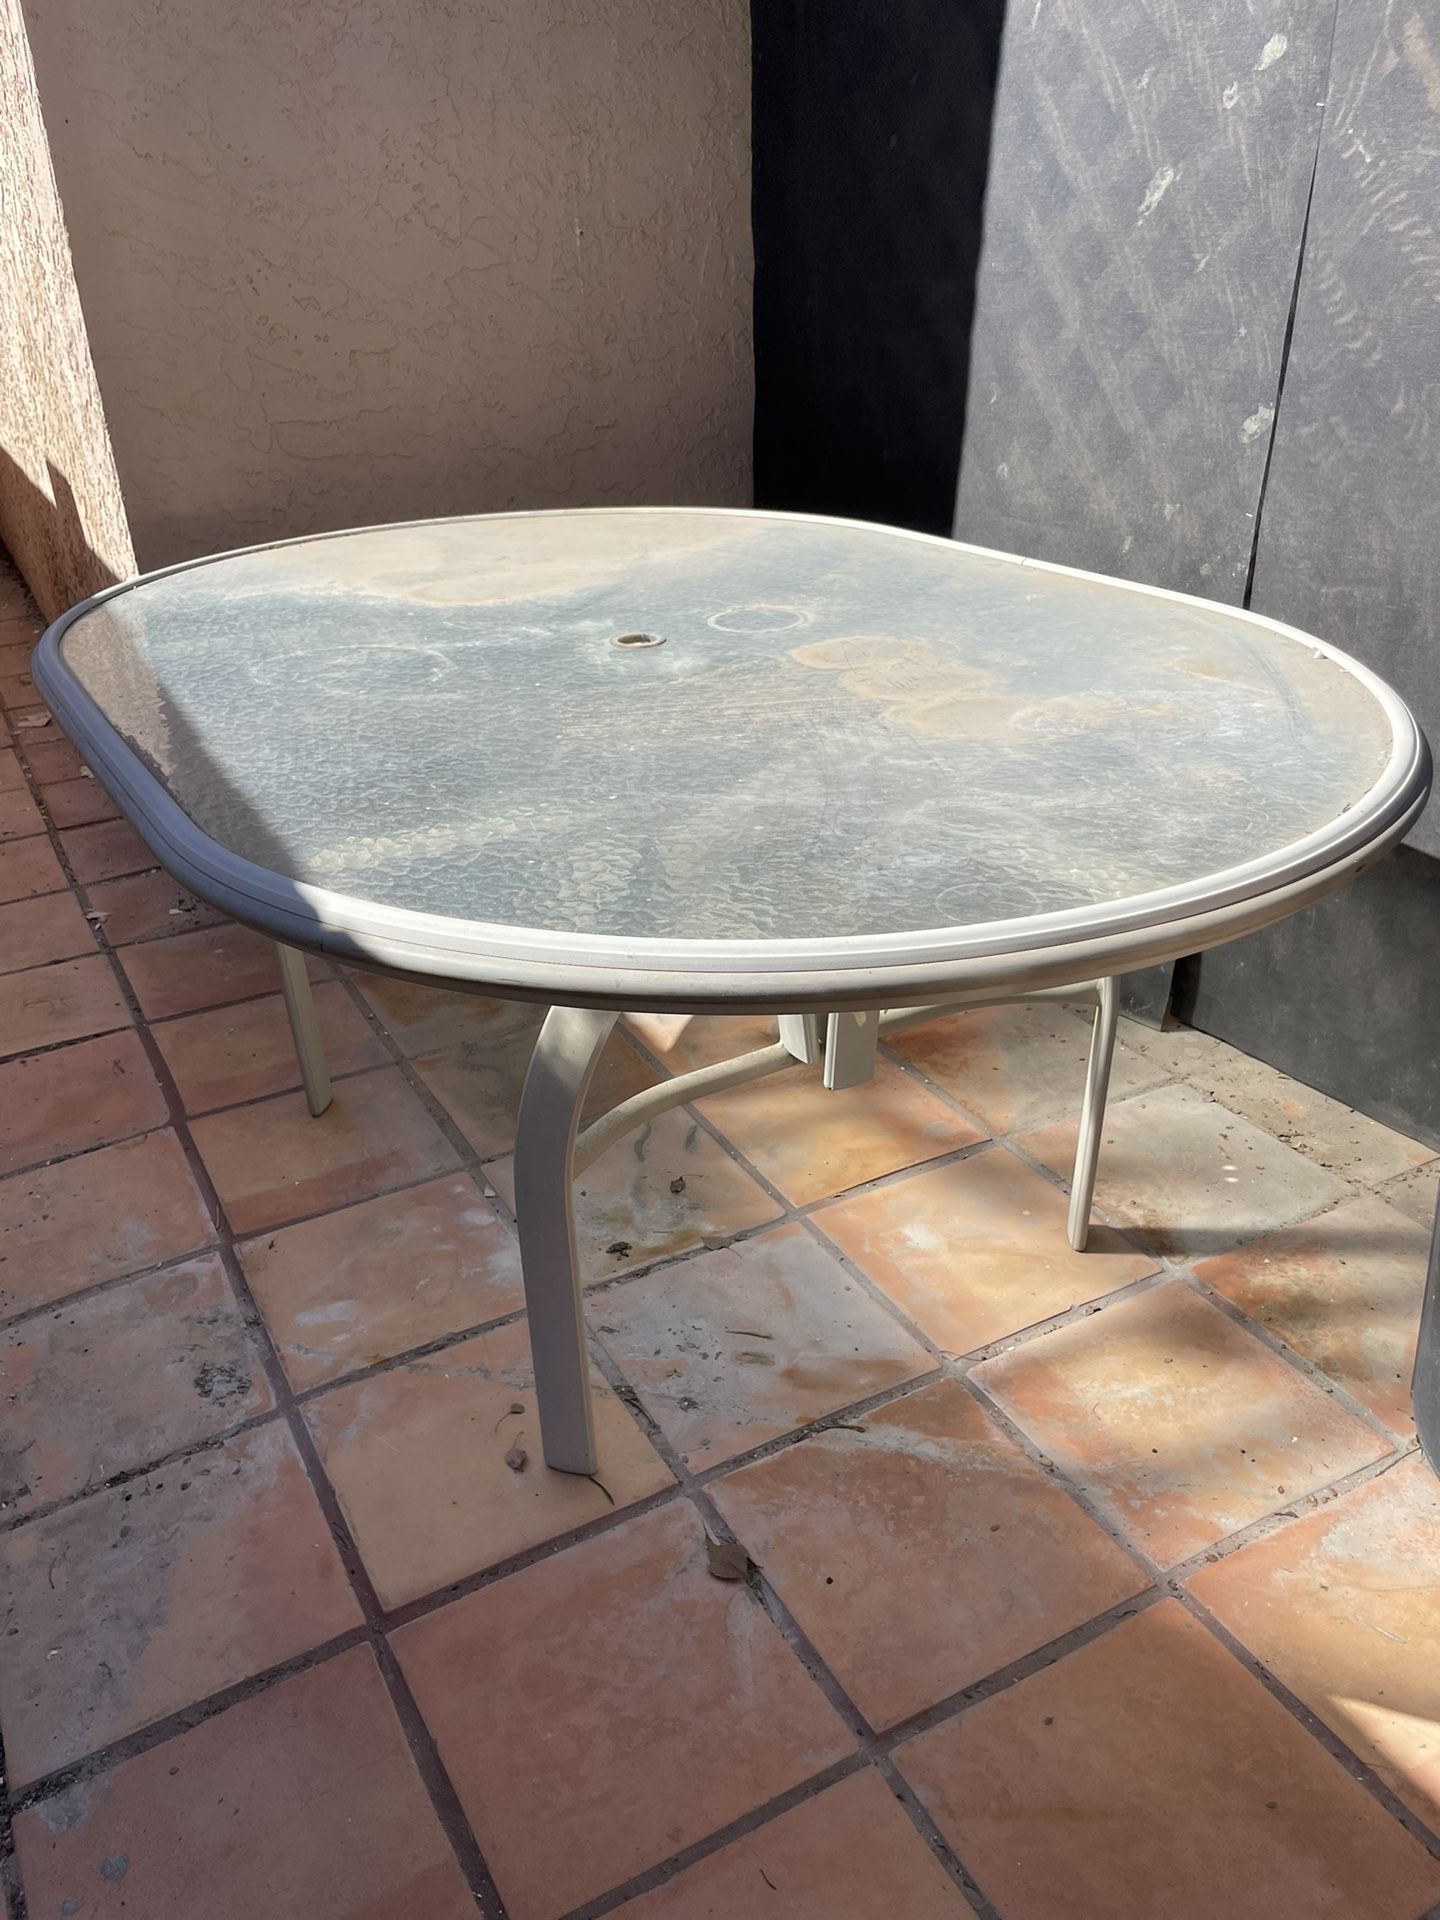 Patio Table And 6 Free Chairs